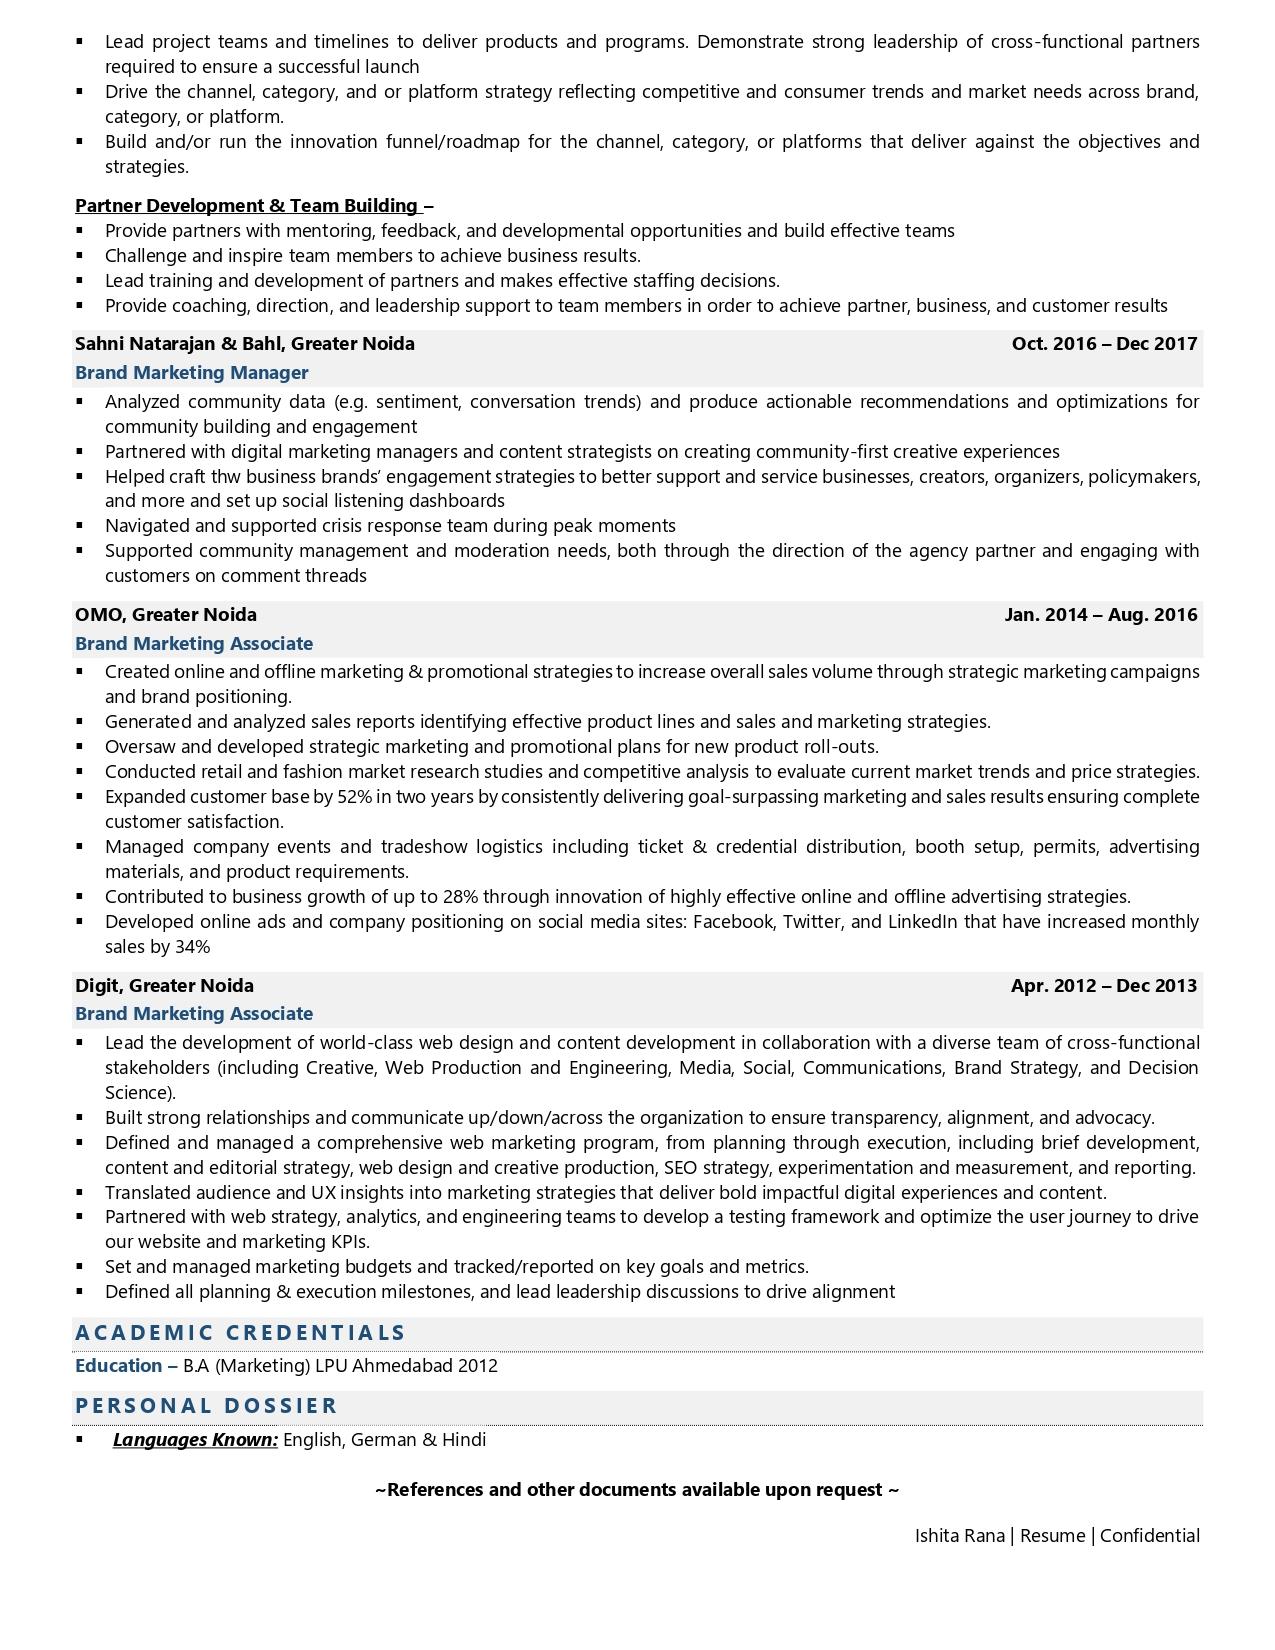 Brand Marketing Manager - Resume Example & Template